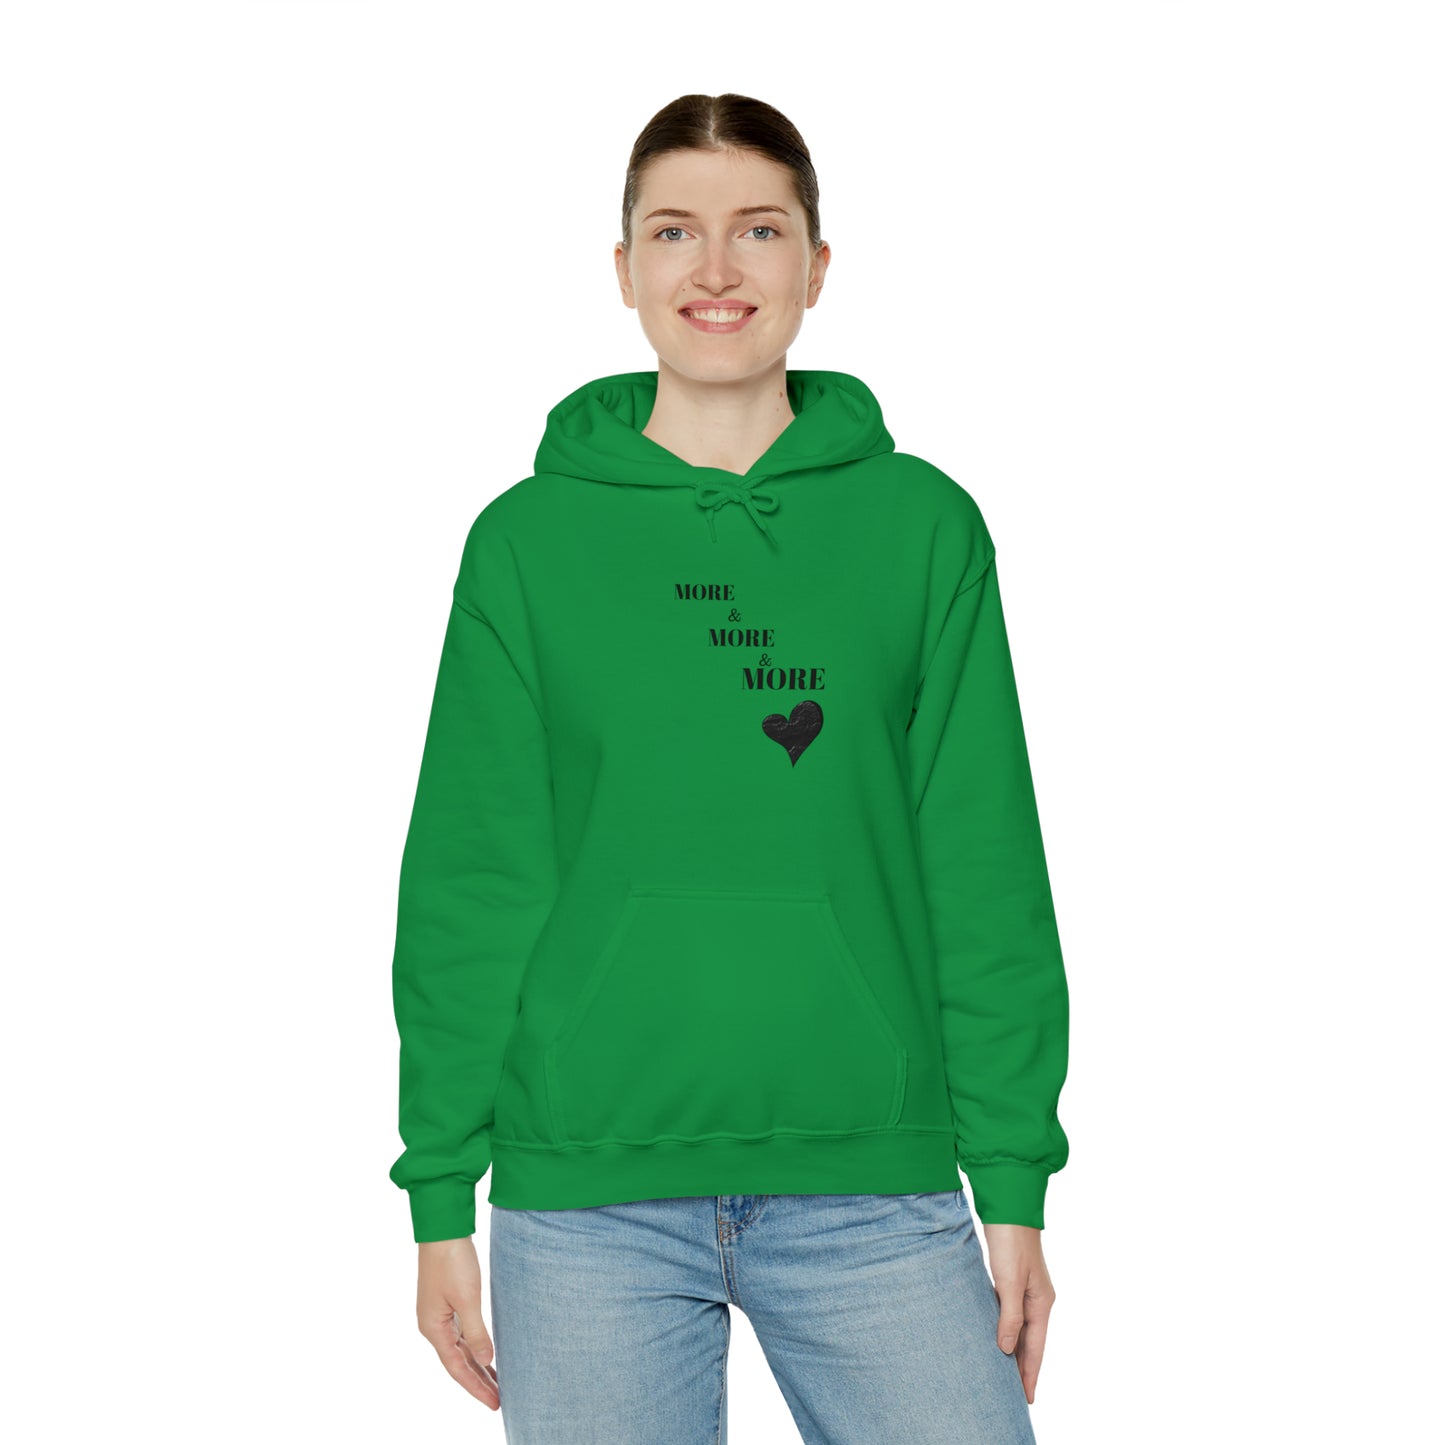 More and more and more love hooded sweatshirt gift, hoodie gift for friends, sweatshirt gift that celebrates love